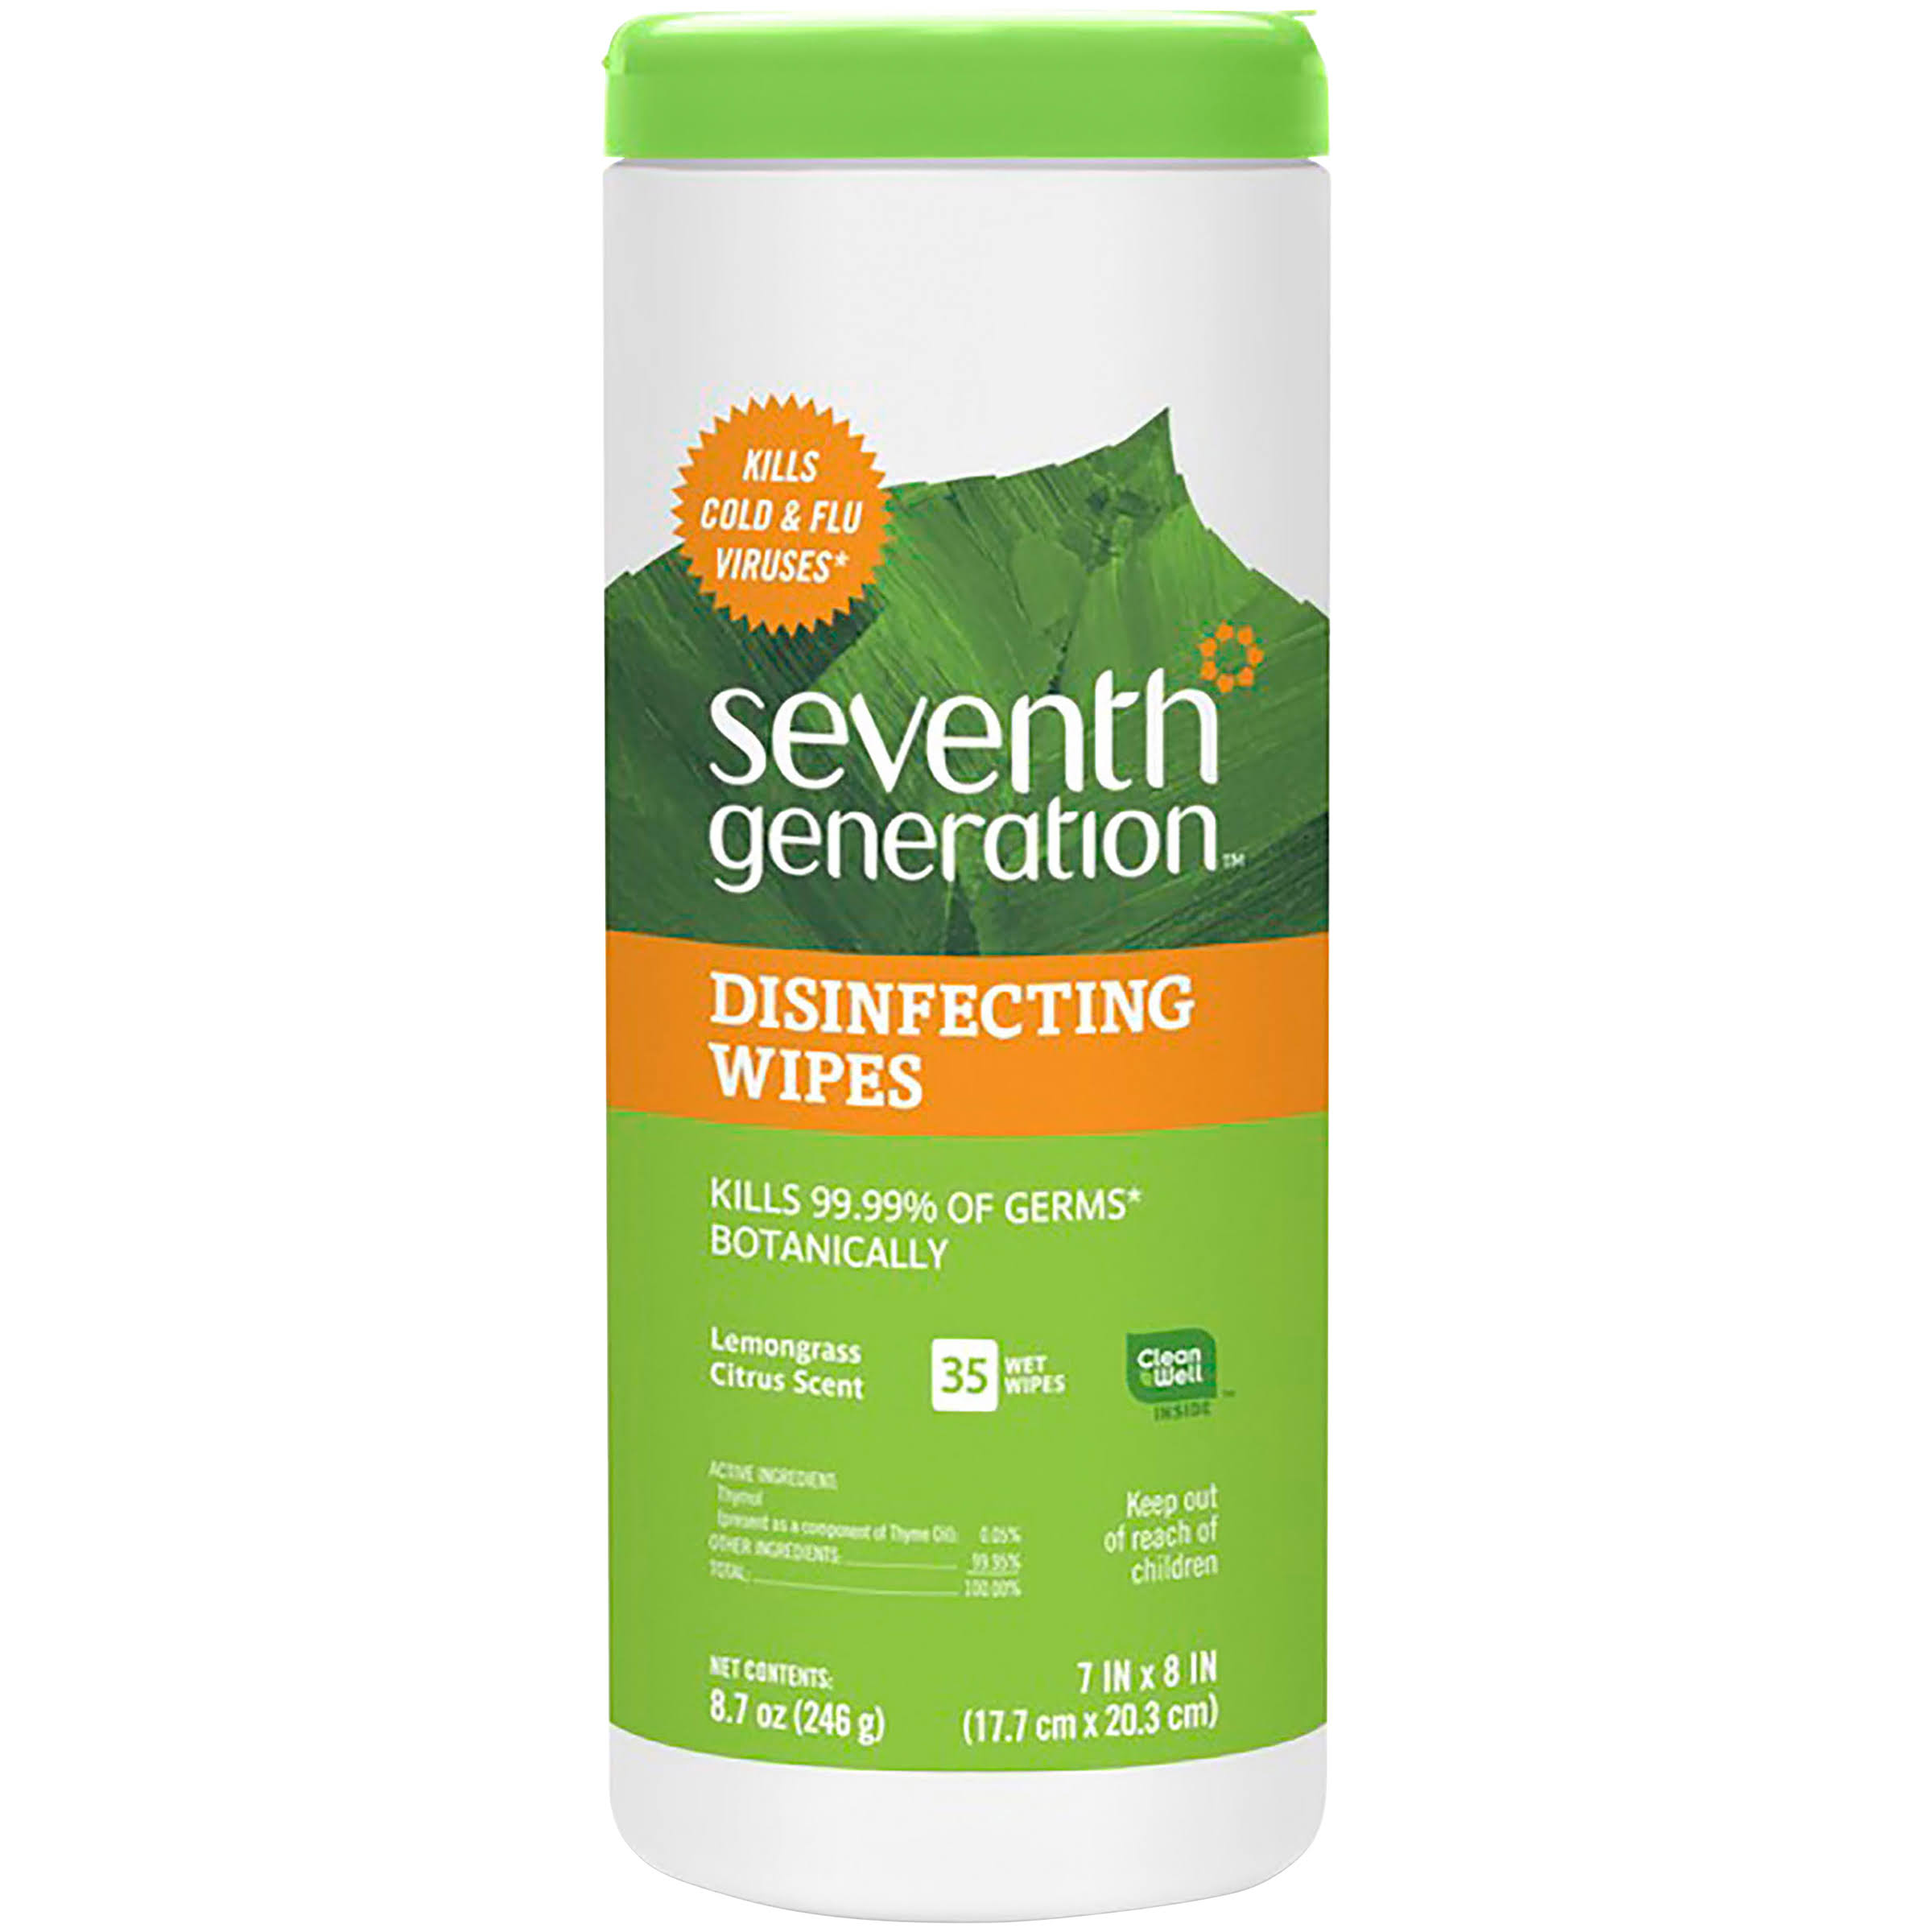 Seventh Generation Botanical Disinfecting Wipes - Lemongrass & Thyme, 35 Pack